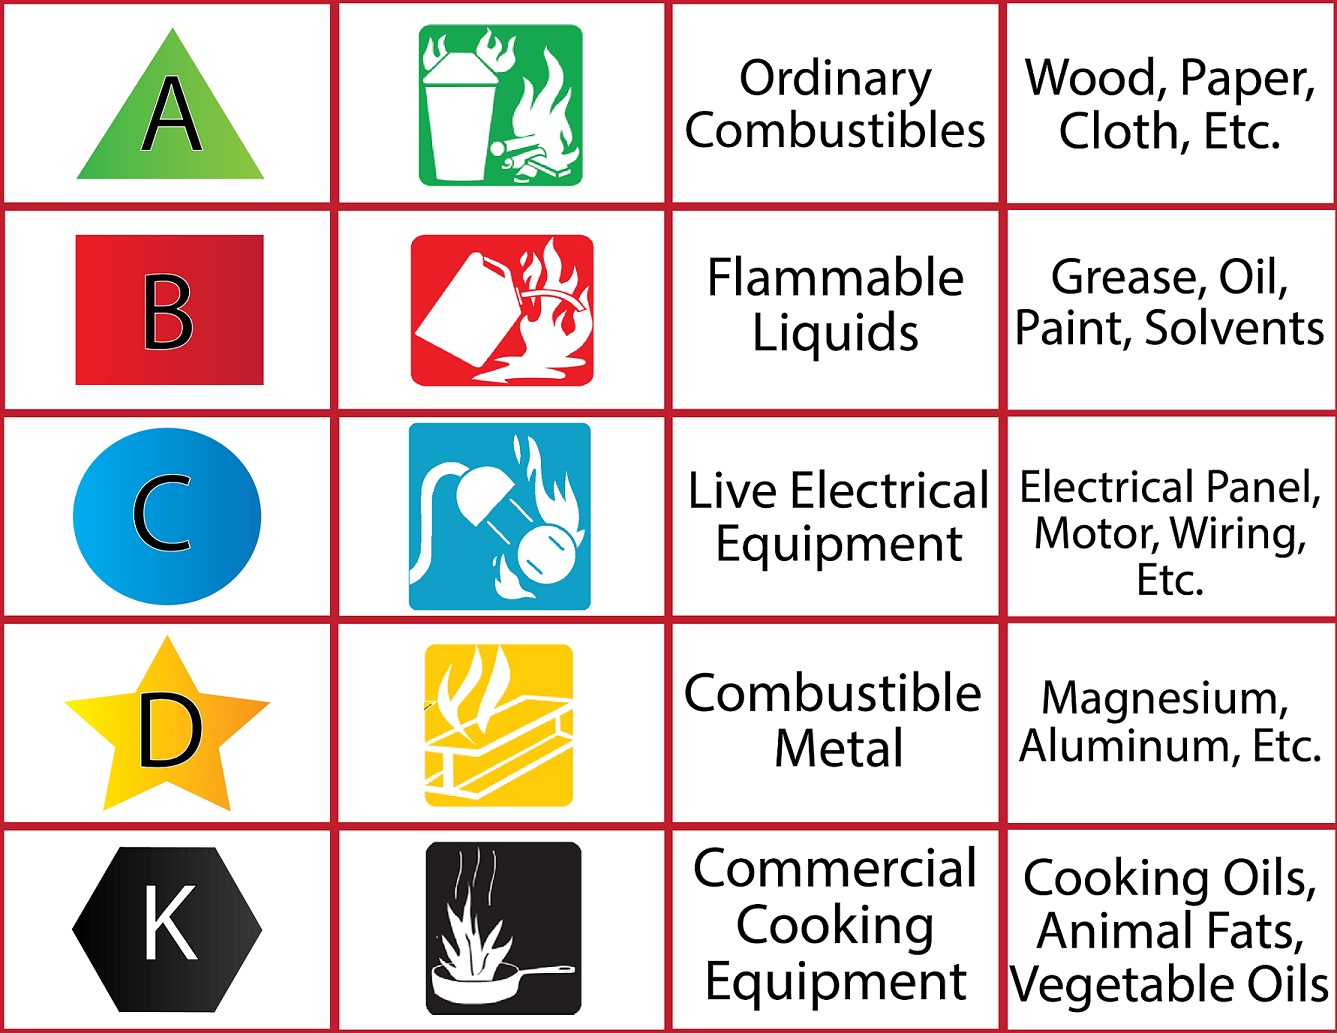 ABCDK fire extinguisher chart